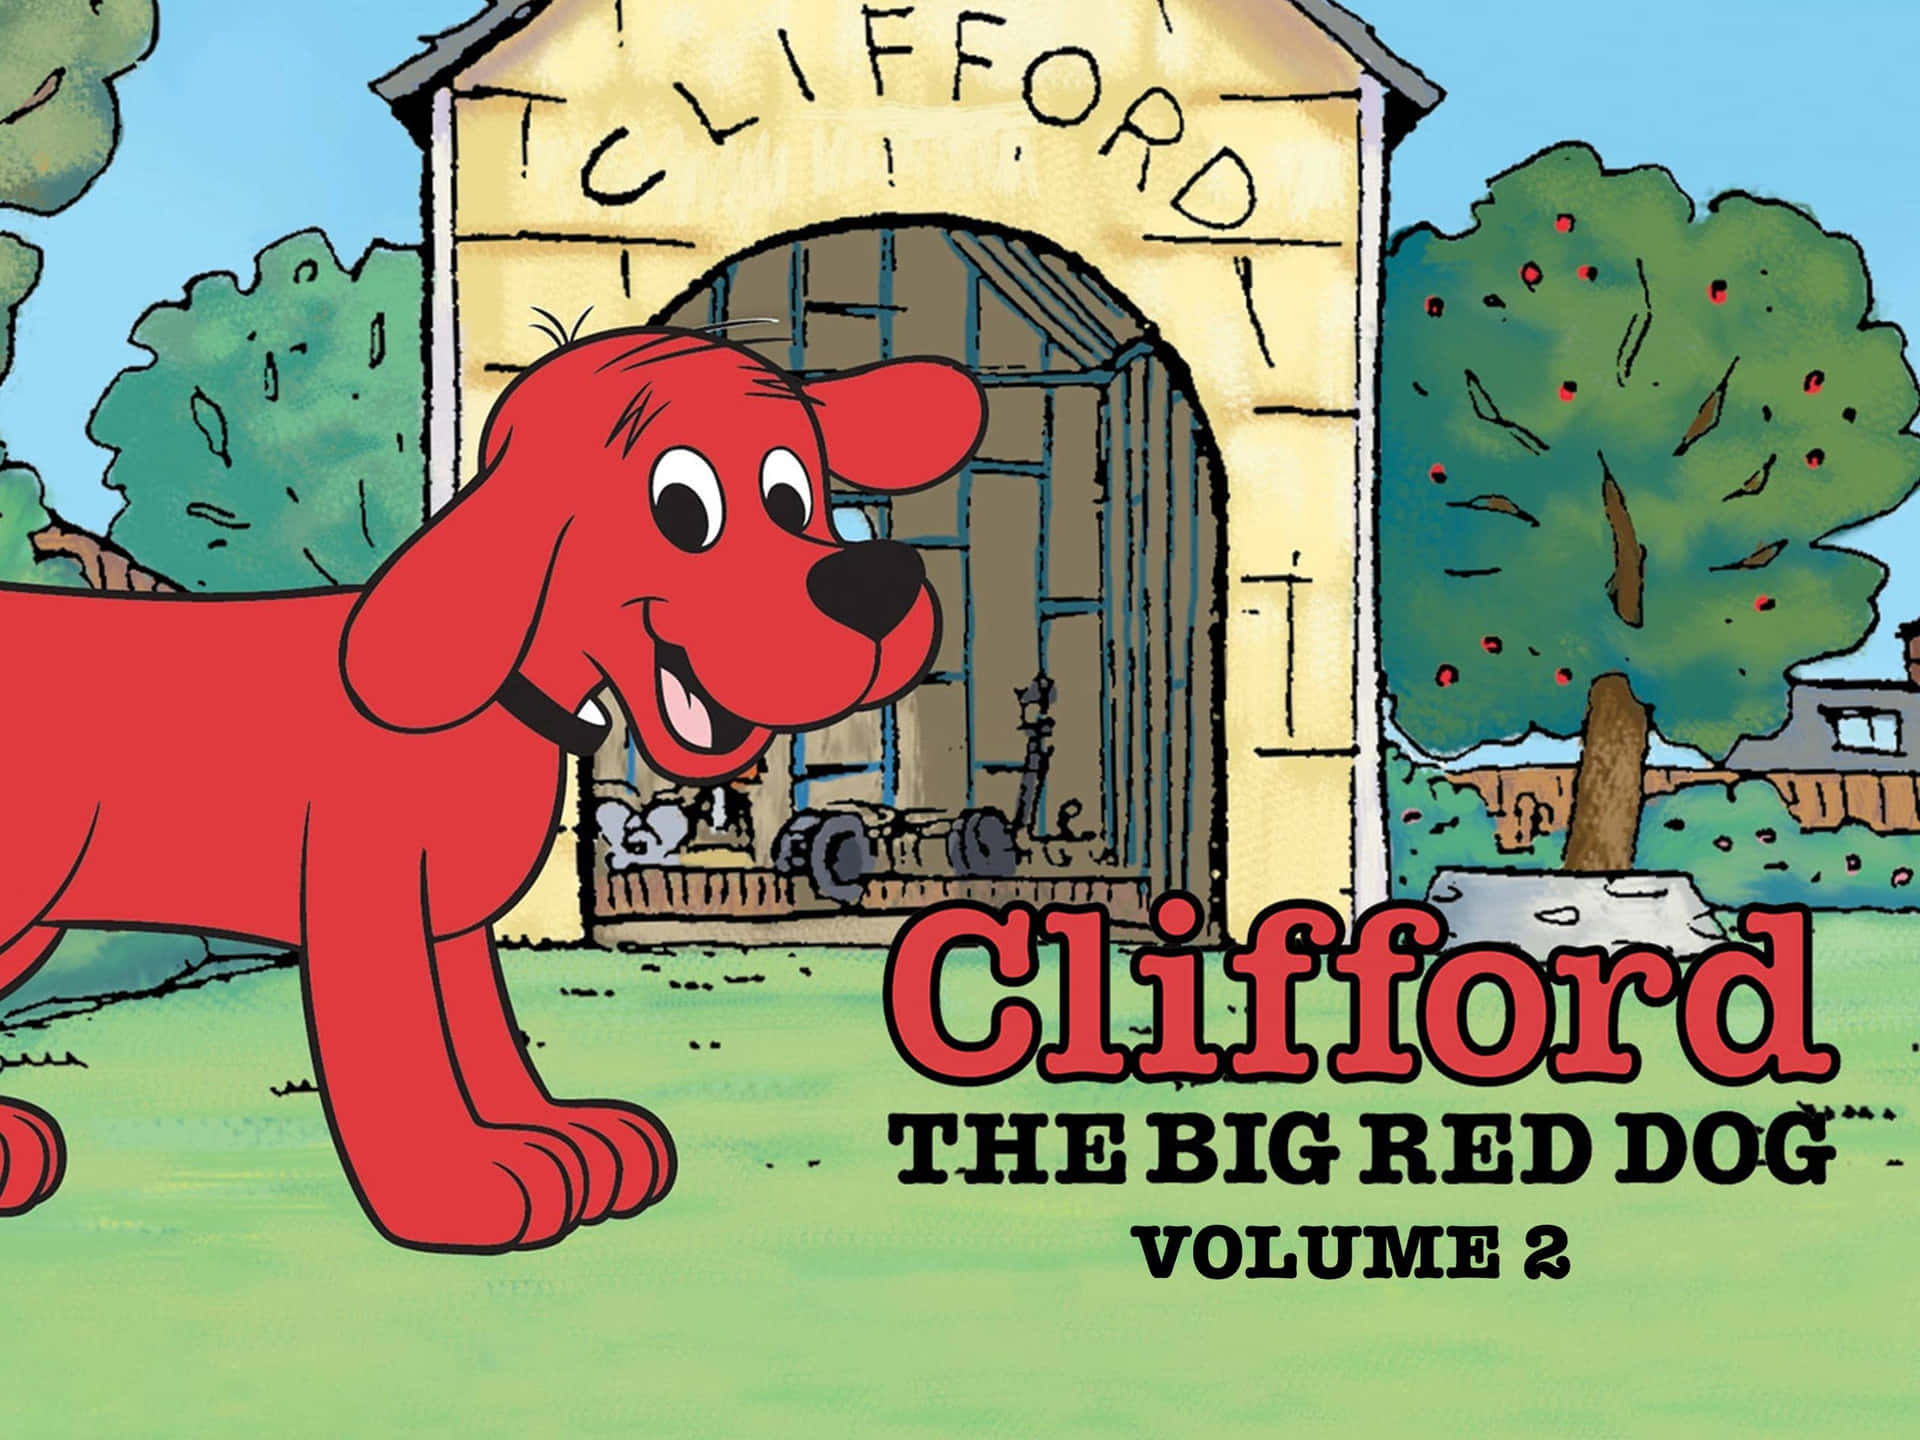 "Enjoying a laugh with Clifford The Big Red Dog!"